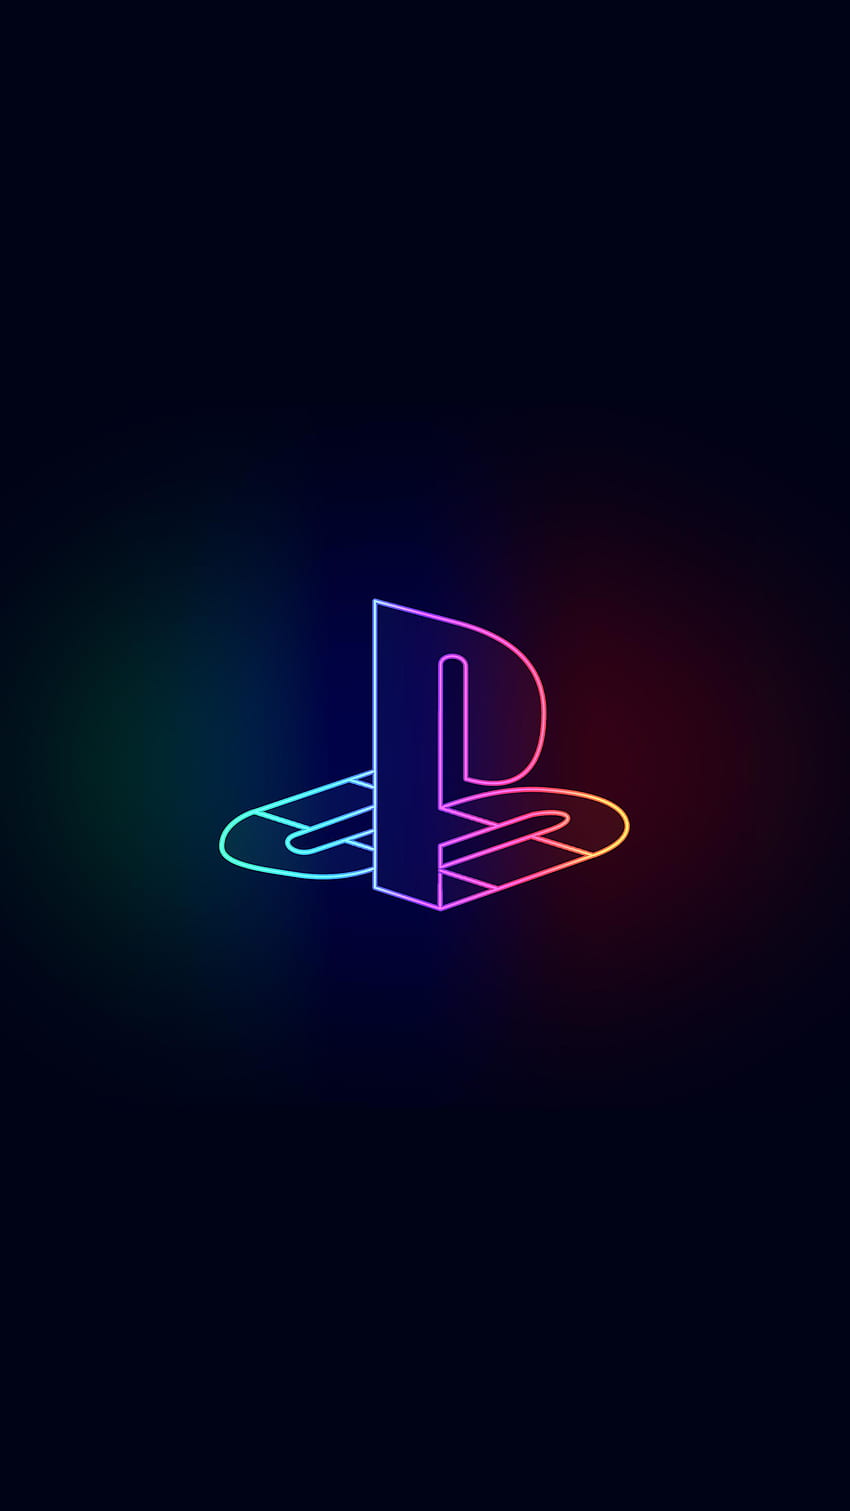 Download wallpapers PlayStation violet logo 4k violet brickwall PlayStation  logo brands PlayStation neon logo PlayStation for desktop with  resolution 3840x2400 High Quality HD pictures wallpapers